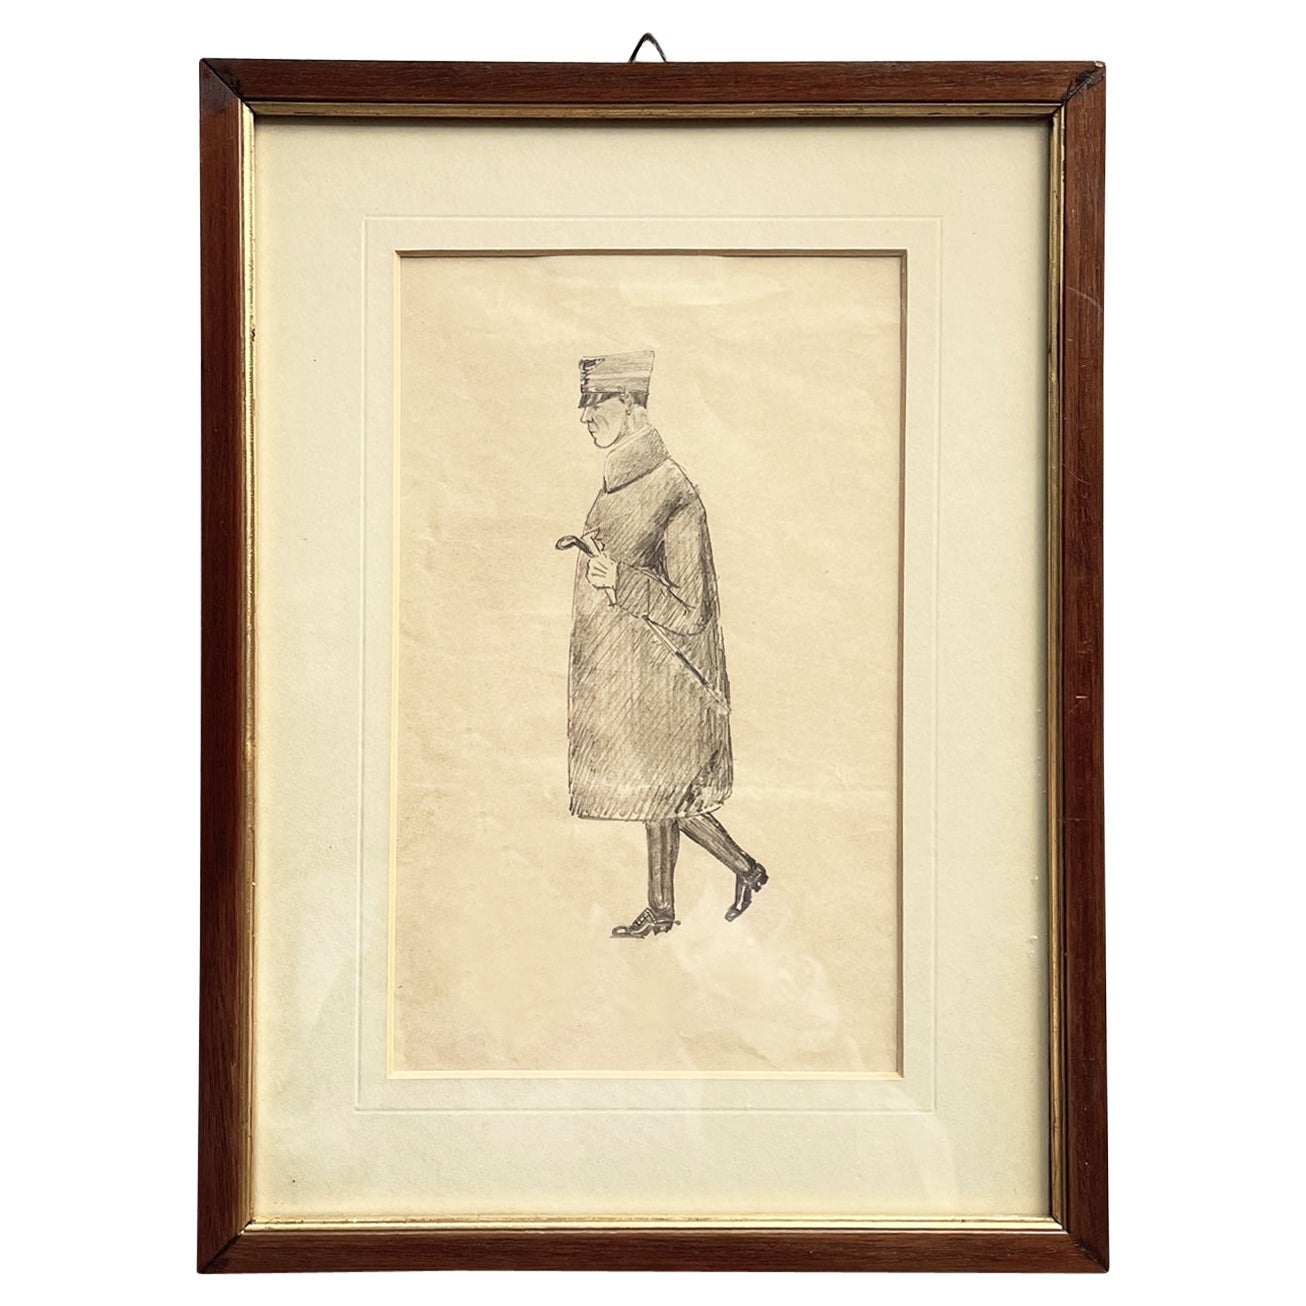 Italian Antique Picture Pencil Drawing on Paper of a Man, in Wooden Frame, 1900s